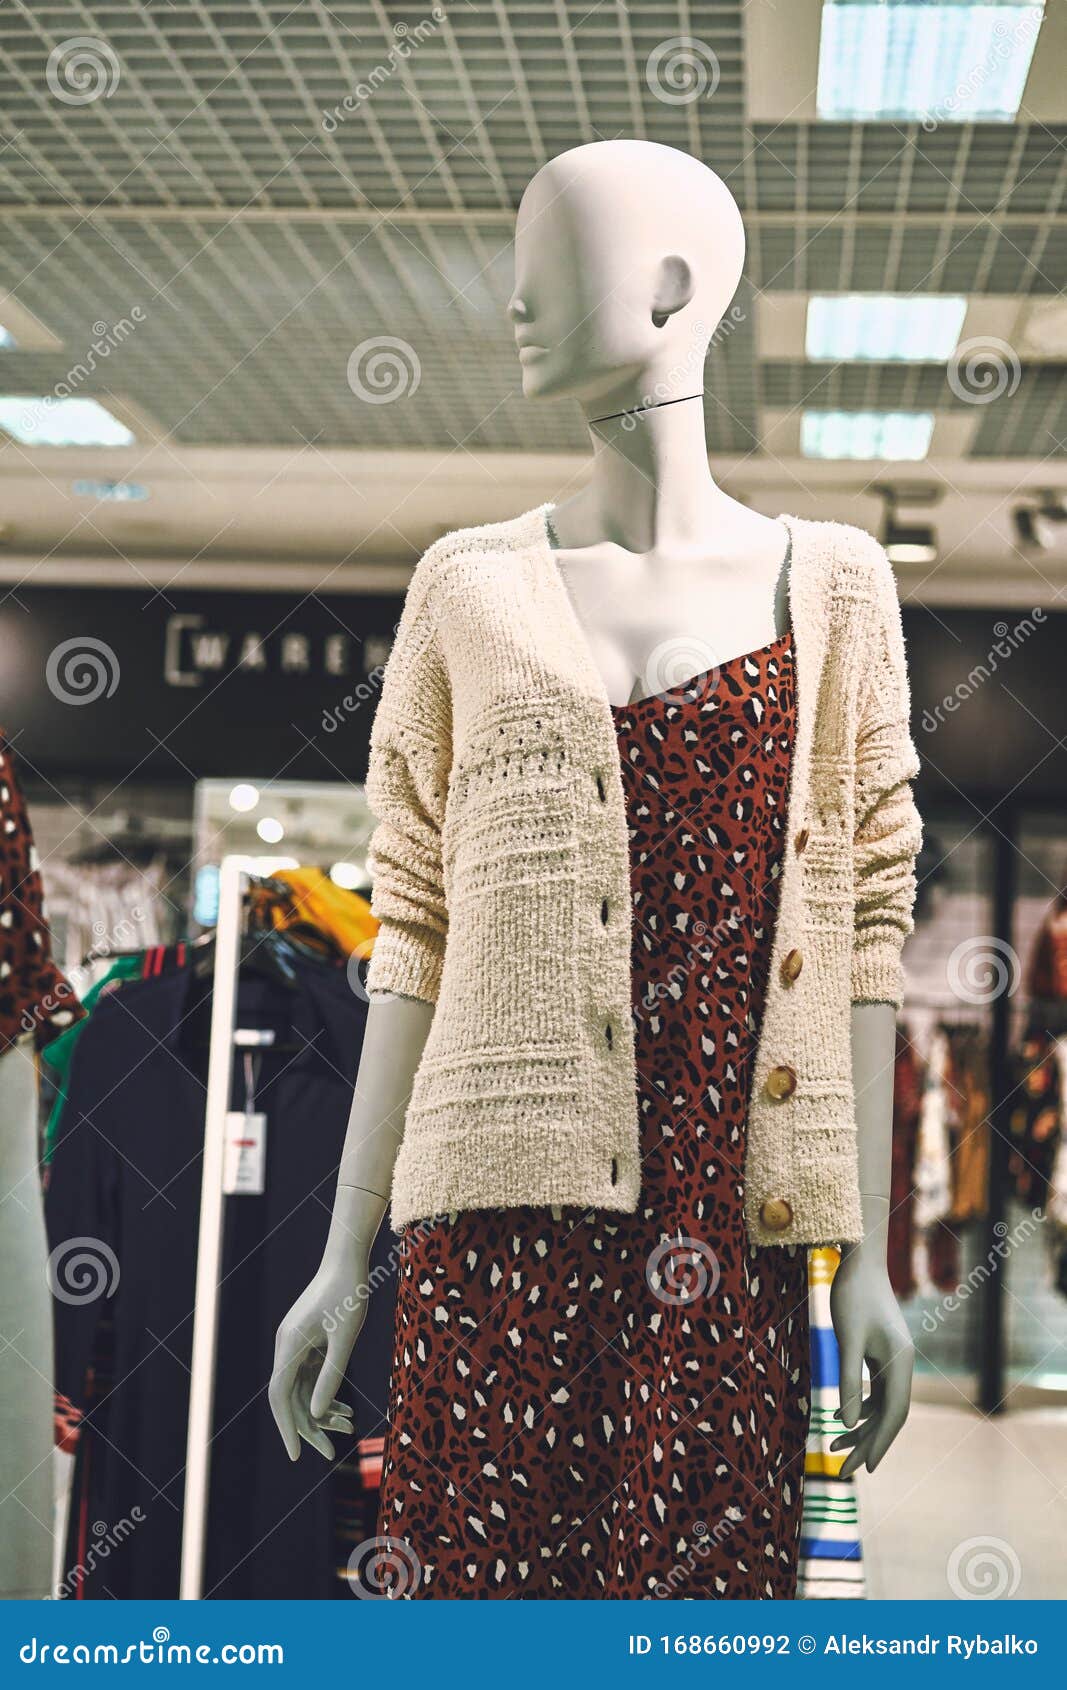 https://thumbs.dreamstime.com/z/photo-female-clothes-mannequin-bag-concepts-shopping-clearance-sale-big-discounts-168660992.jpg